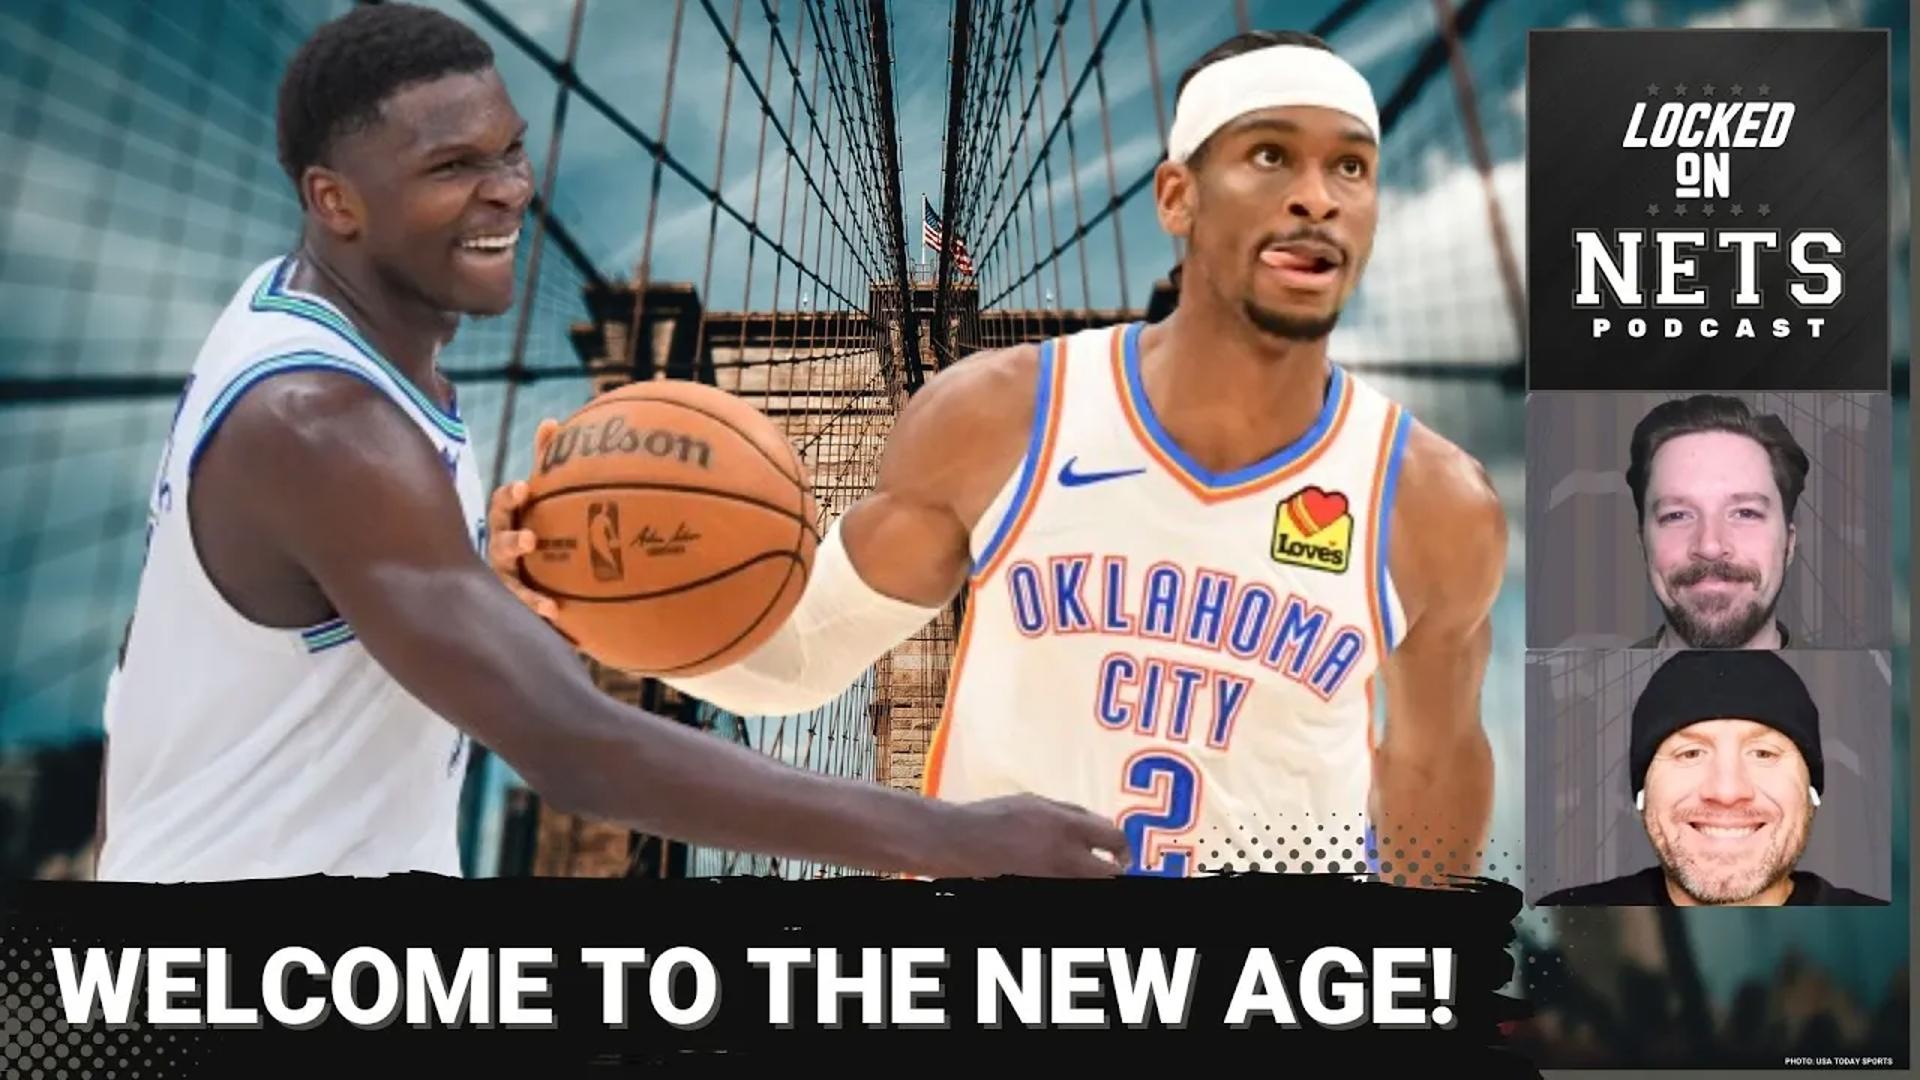 With Anthony Edwards leading the. Minnesota Timberwolves and Shai Gilgeous-Alexander leading the Oklahoma City Thunder, should the Brooklyn Nets take notes?